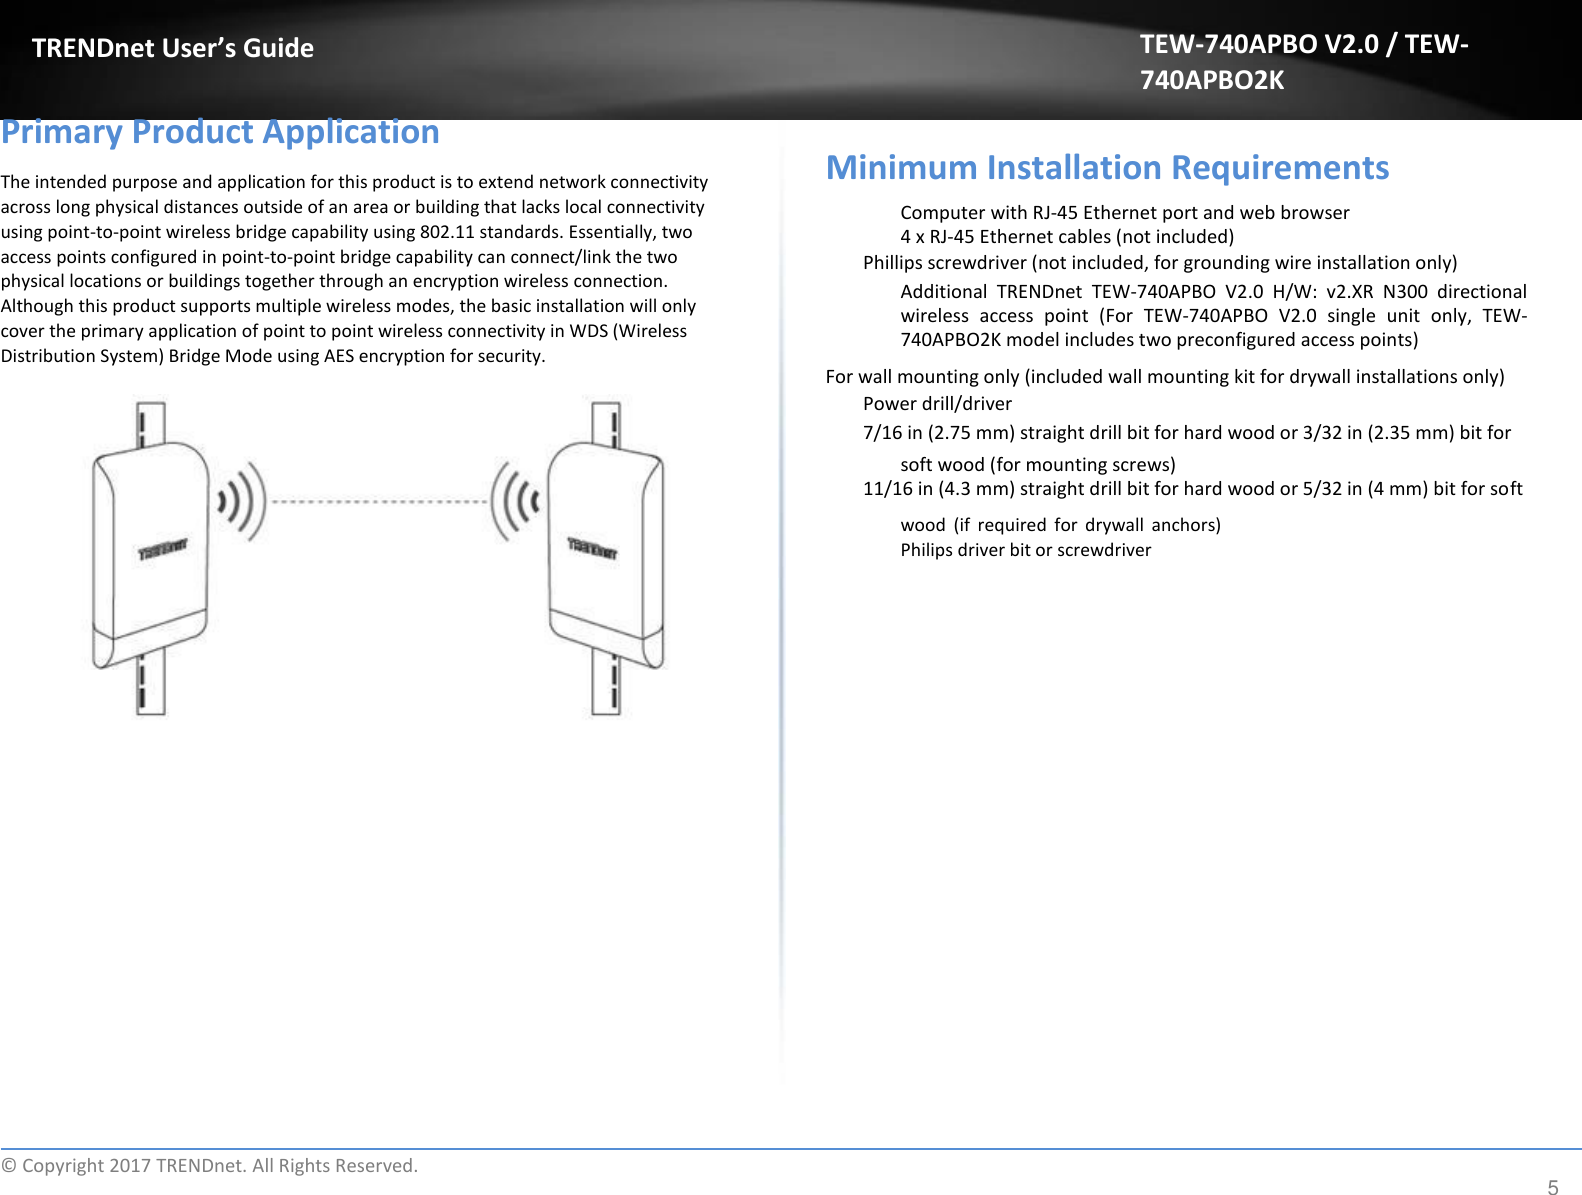  TRENDnet User’s Guide   Primary Product Application  The intended purpose and application for this product is to extend network connectivity across long physical distances outside of an area or building that lacks local connectivity using point-to-point wireless bridge capability using 802.11 standards. Essentially, two access points configured in point-to-point bridge capability can connect/link the two physical locations or buildings together through an encryption wireless connection. Although this product supports multiple wireless modes, the basic installation will only cover the primary application of point to point wireless connectivity in WDS (Wireless Distribution System) Bridge Mode using AES encryption for security. TEW-740APBO V2.0 / TEW-740APBO2K   Minimum Installation Requirements  Computer with RJ-45 Ethernet port and web browser 4 x RJ-45 Ethernet cables (not included)  Phillips screwdriver (not included, for grounding wire installation only)  Additional  TRENDnet  TEW-740APBO  V2.0  H/W:  v2.XR  N300  directional wireless  access  point  (For  TEW-740APBO  V2.0  single  unit  only,  TEW-740APBO2K model includes two preconfigured access points)  For wall mounting only (included wall mounting kit for drywall installations only)  Power drill/driver  7/16 in (2.75 mm) straight drill bit for hard wood or 3/32 in (2.35 mm) bit for  soft wood (for mounting screws) 11/16 in (4.3 mm) straight drill bit for hard wood or 5/32 in (4 mm) bit for soft  wood  (if  required  for  drywall  anchors) Philips driver bit or screwdriver                             ©  Copyright 2017 TRENDnet. All Rights Reserved. 5 